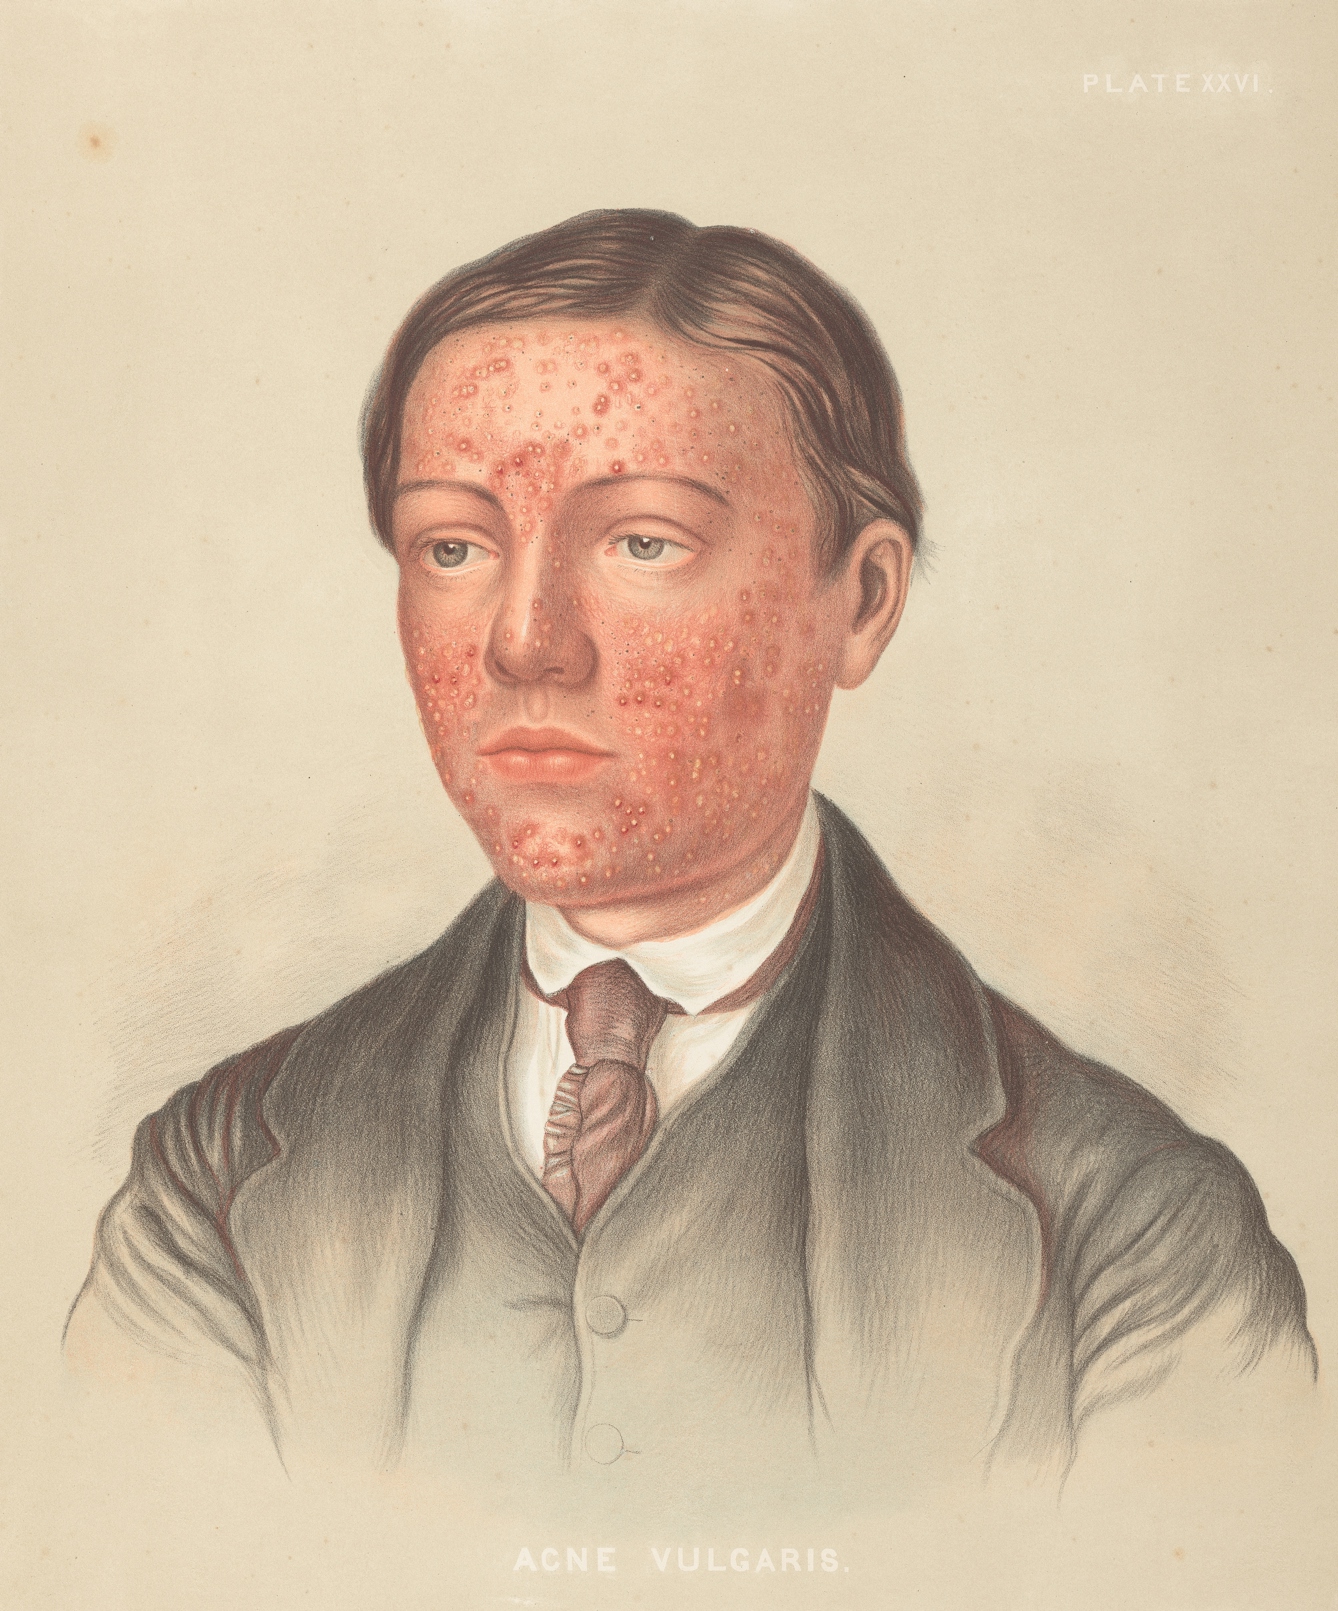 Photograph of an illustration showing the head and shoulders of a man in a suit and tie, with red acne marks on his face.